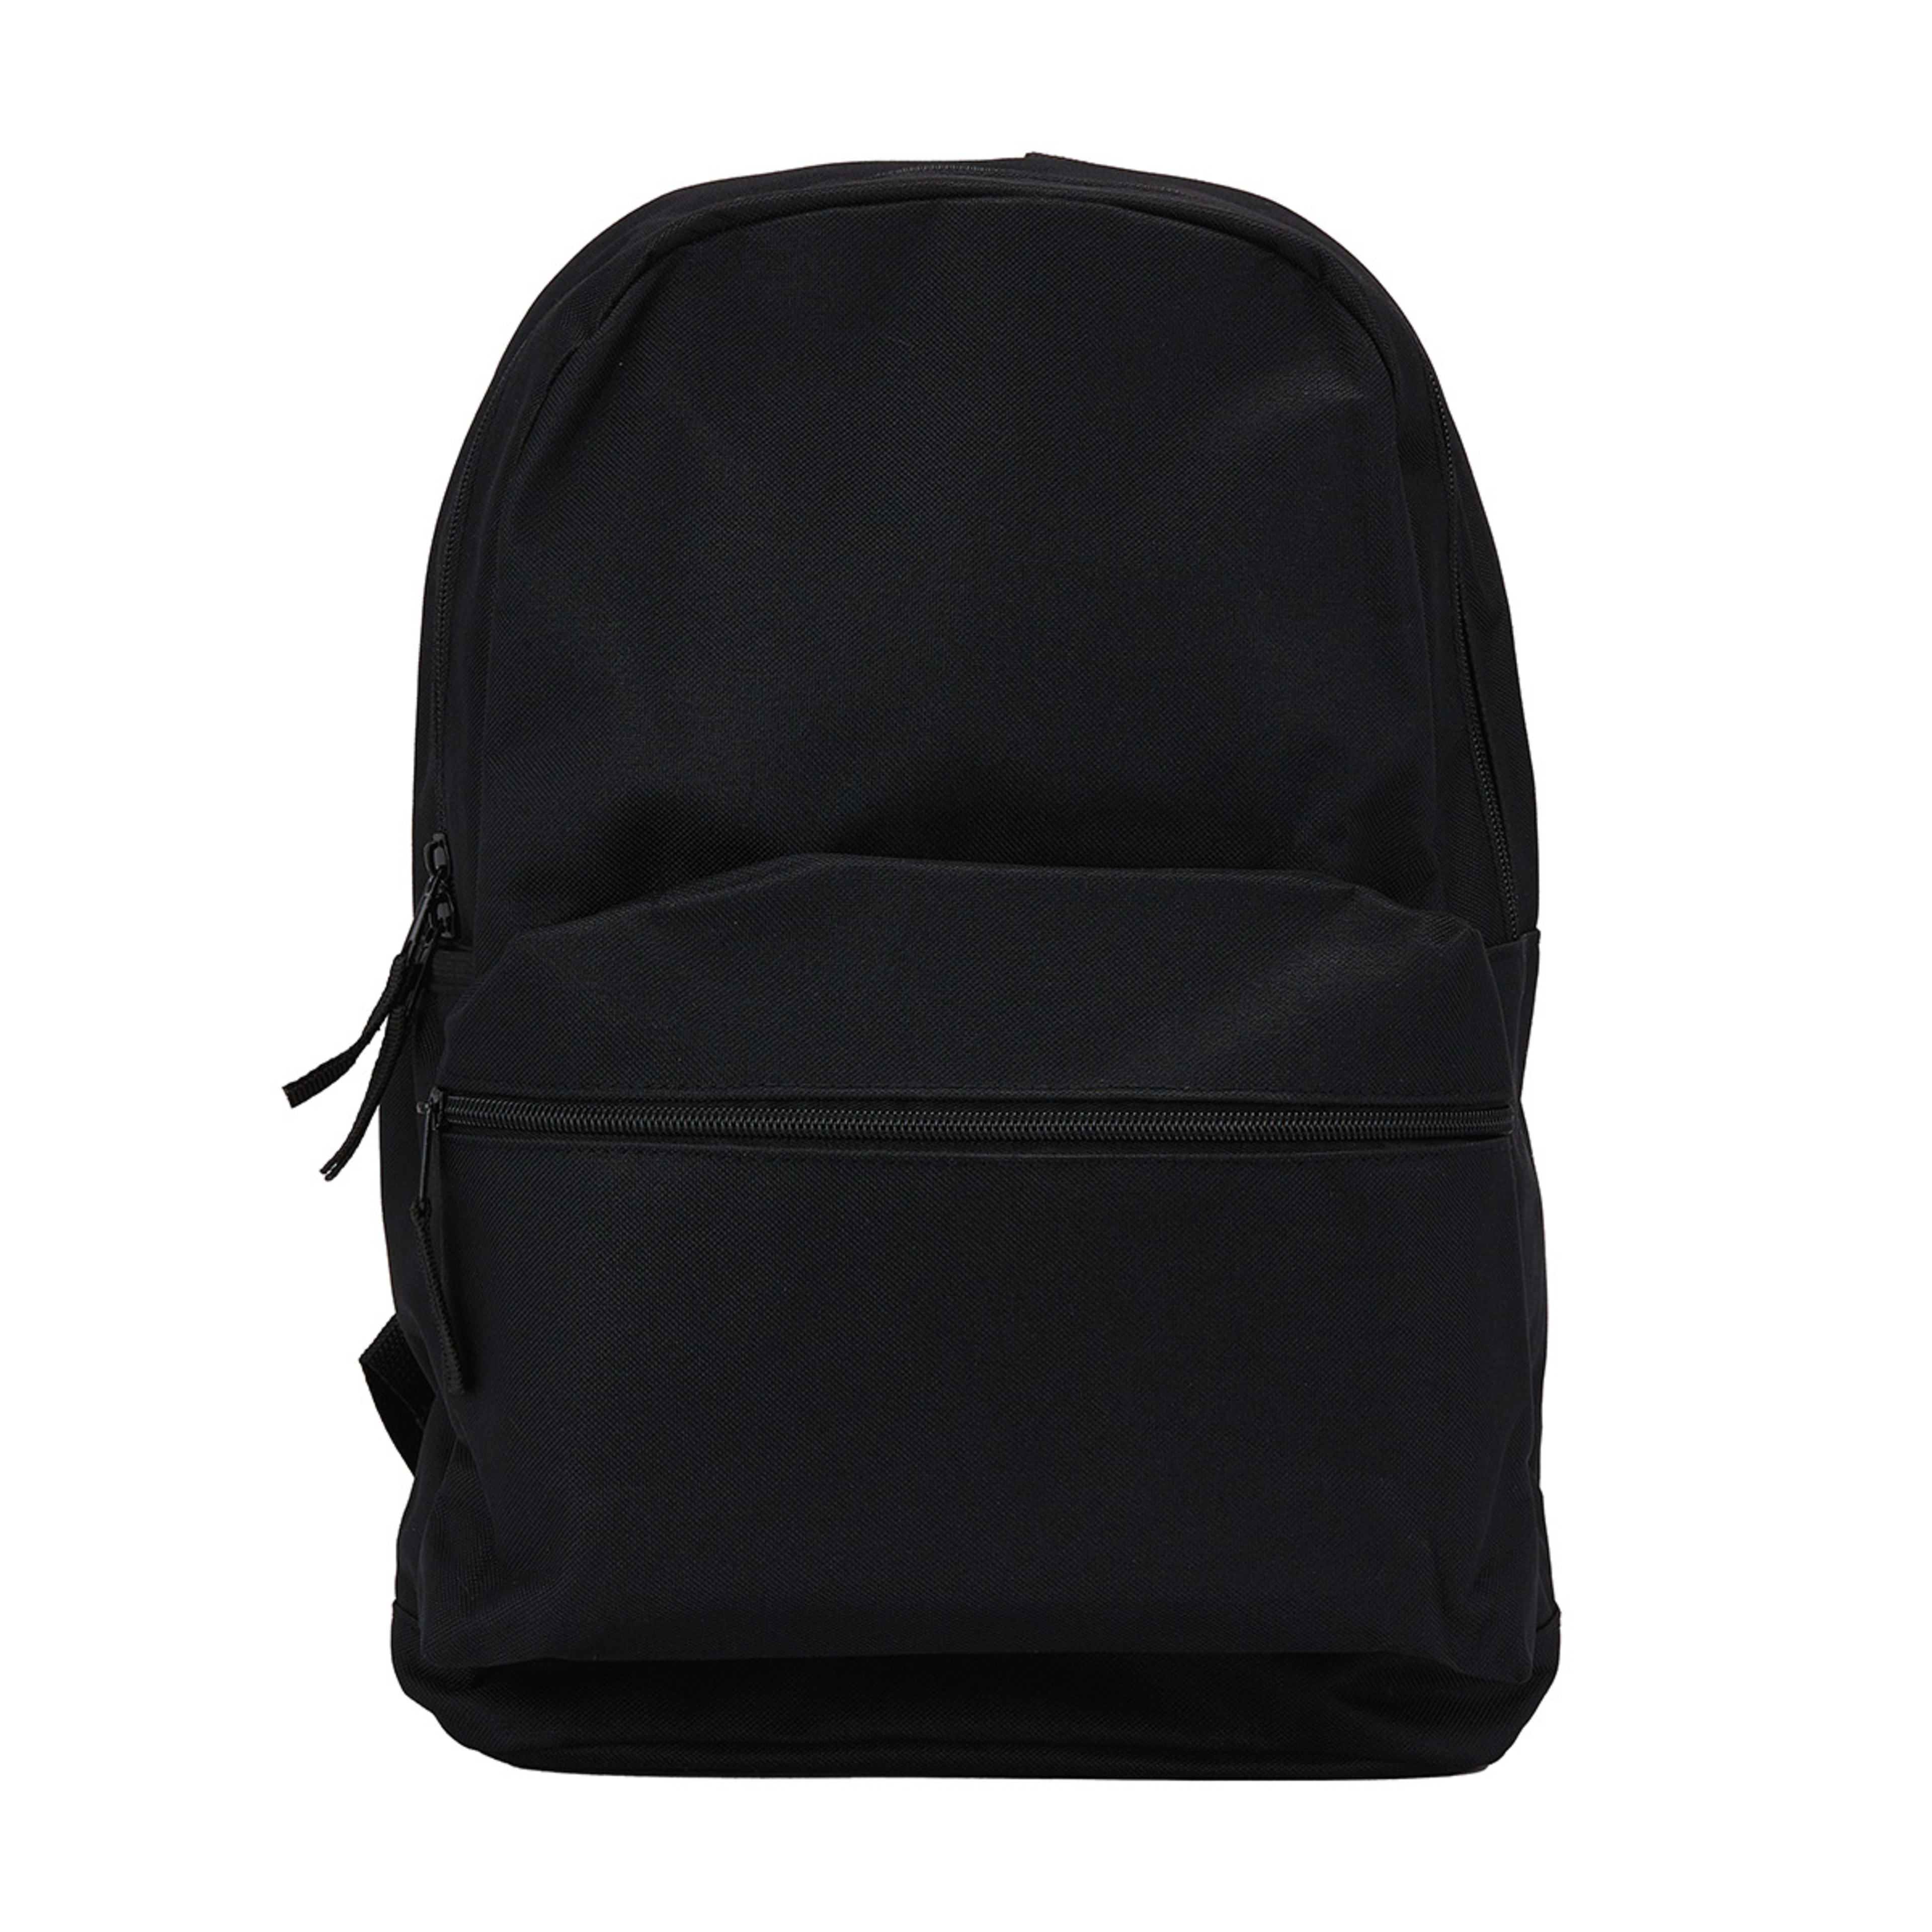 12.4L Classic Everyday Backpack - Black - Kmart